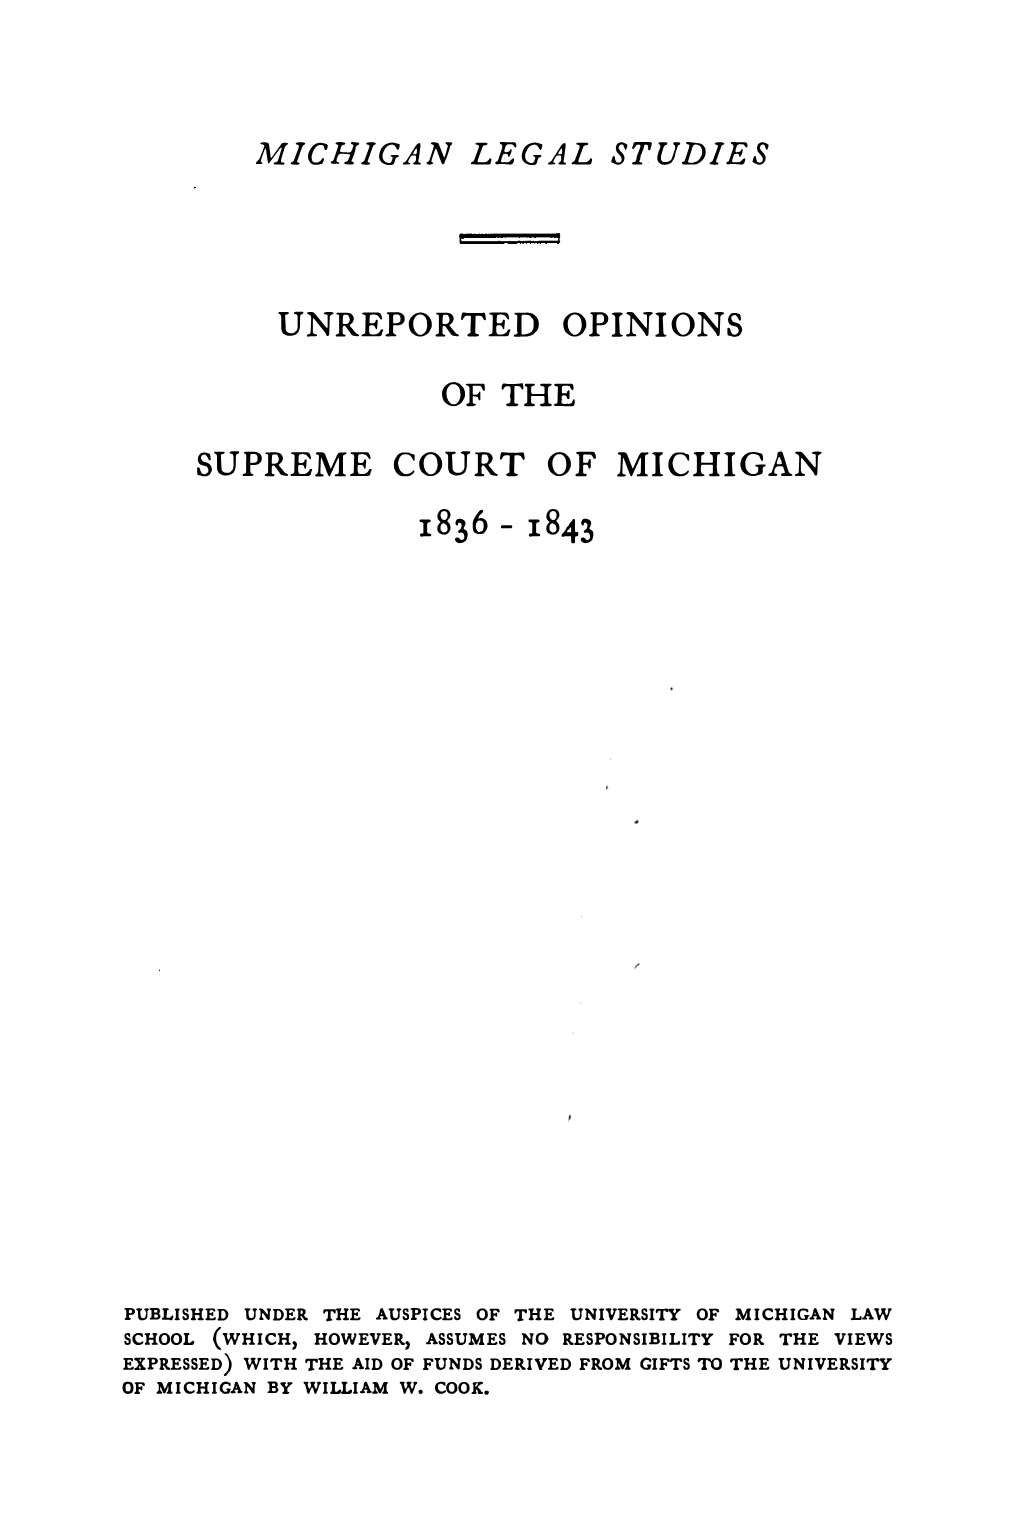 Michigan Legal Studies Unreported Opinions of The